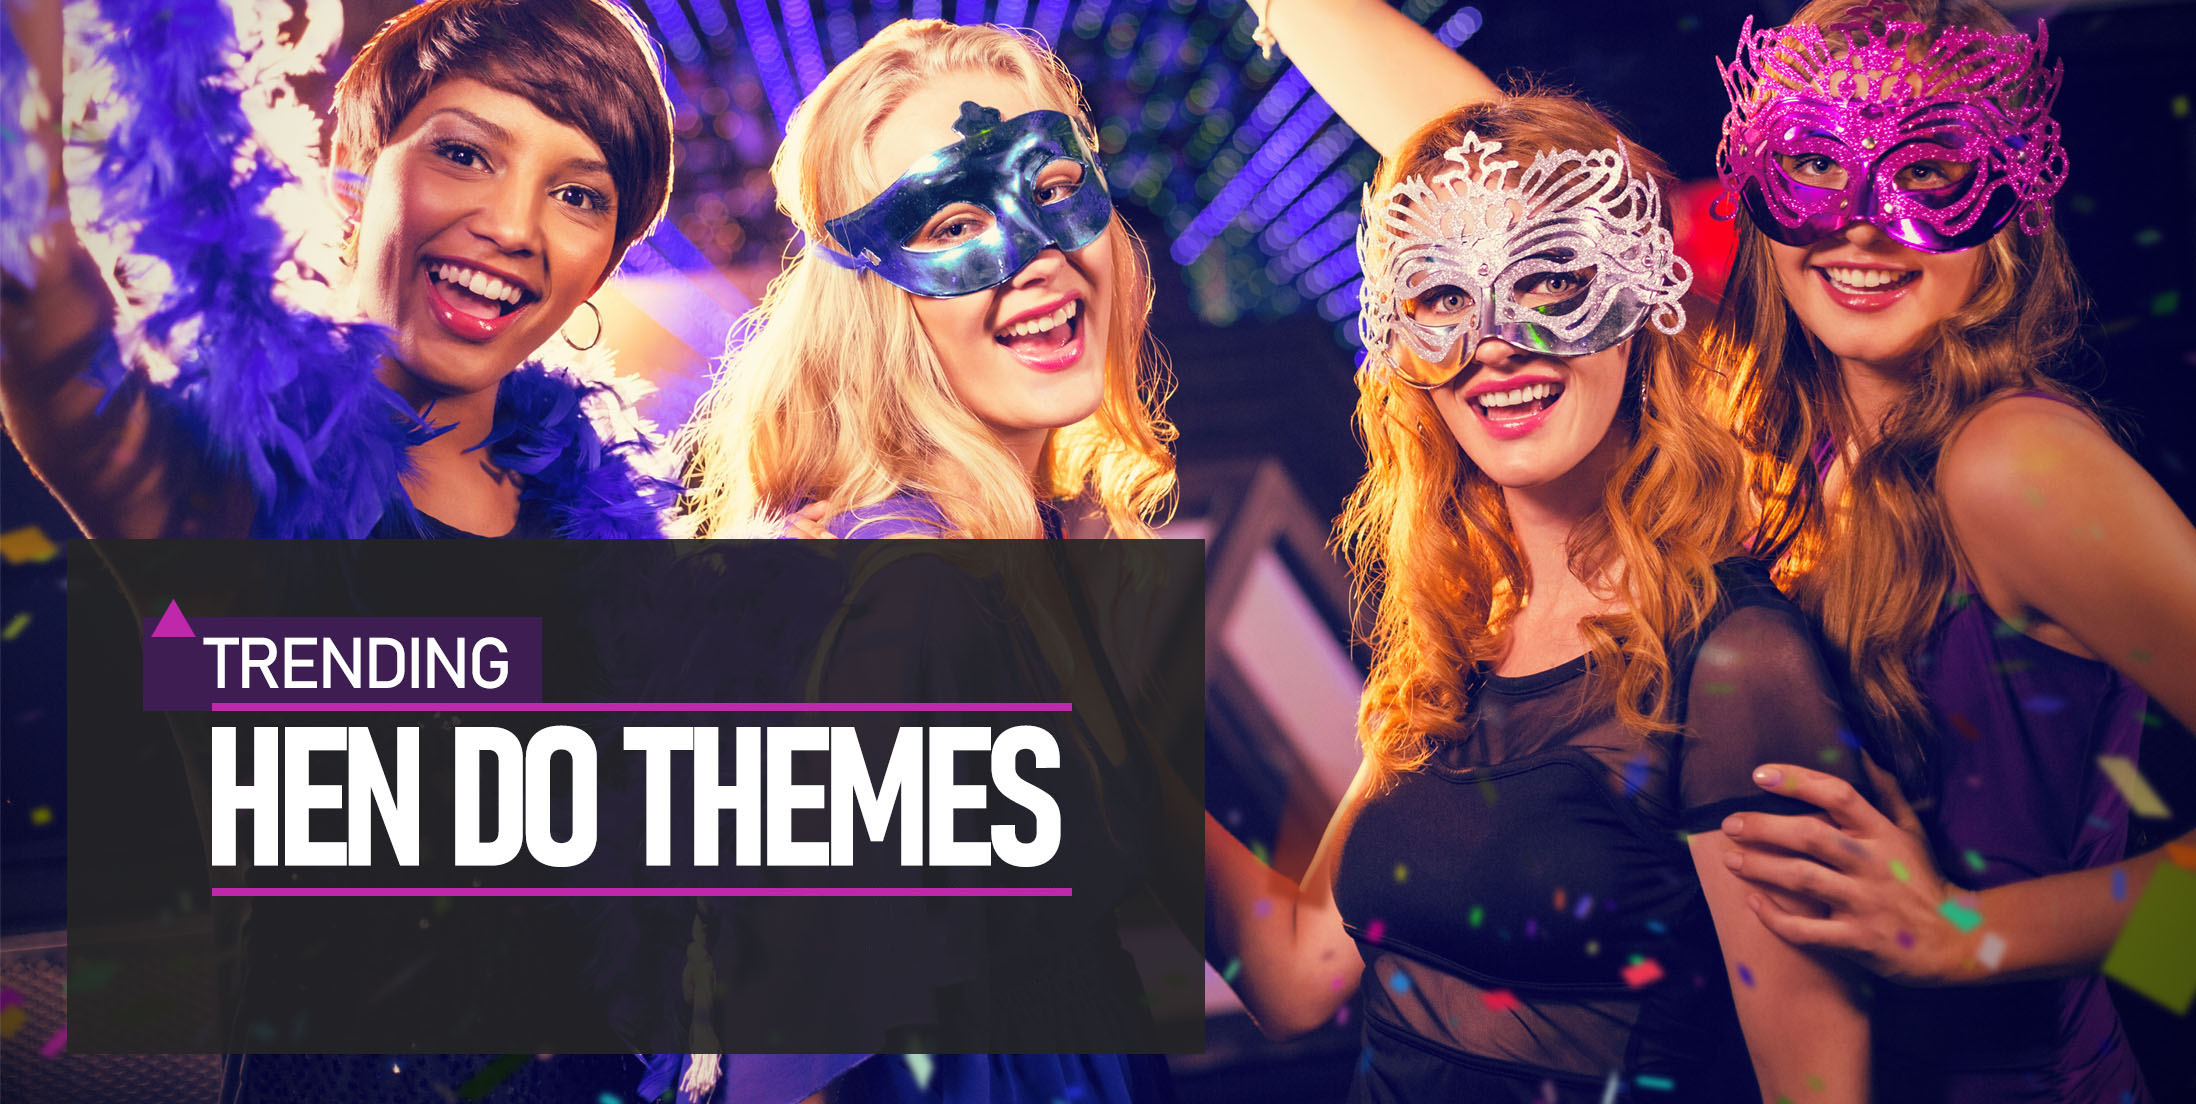 24 Trending Hen Party Themes | Classy, Subtle, Funny